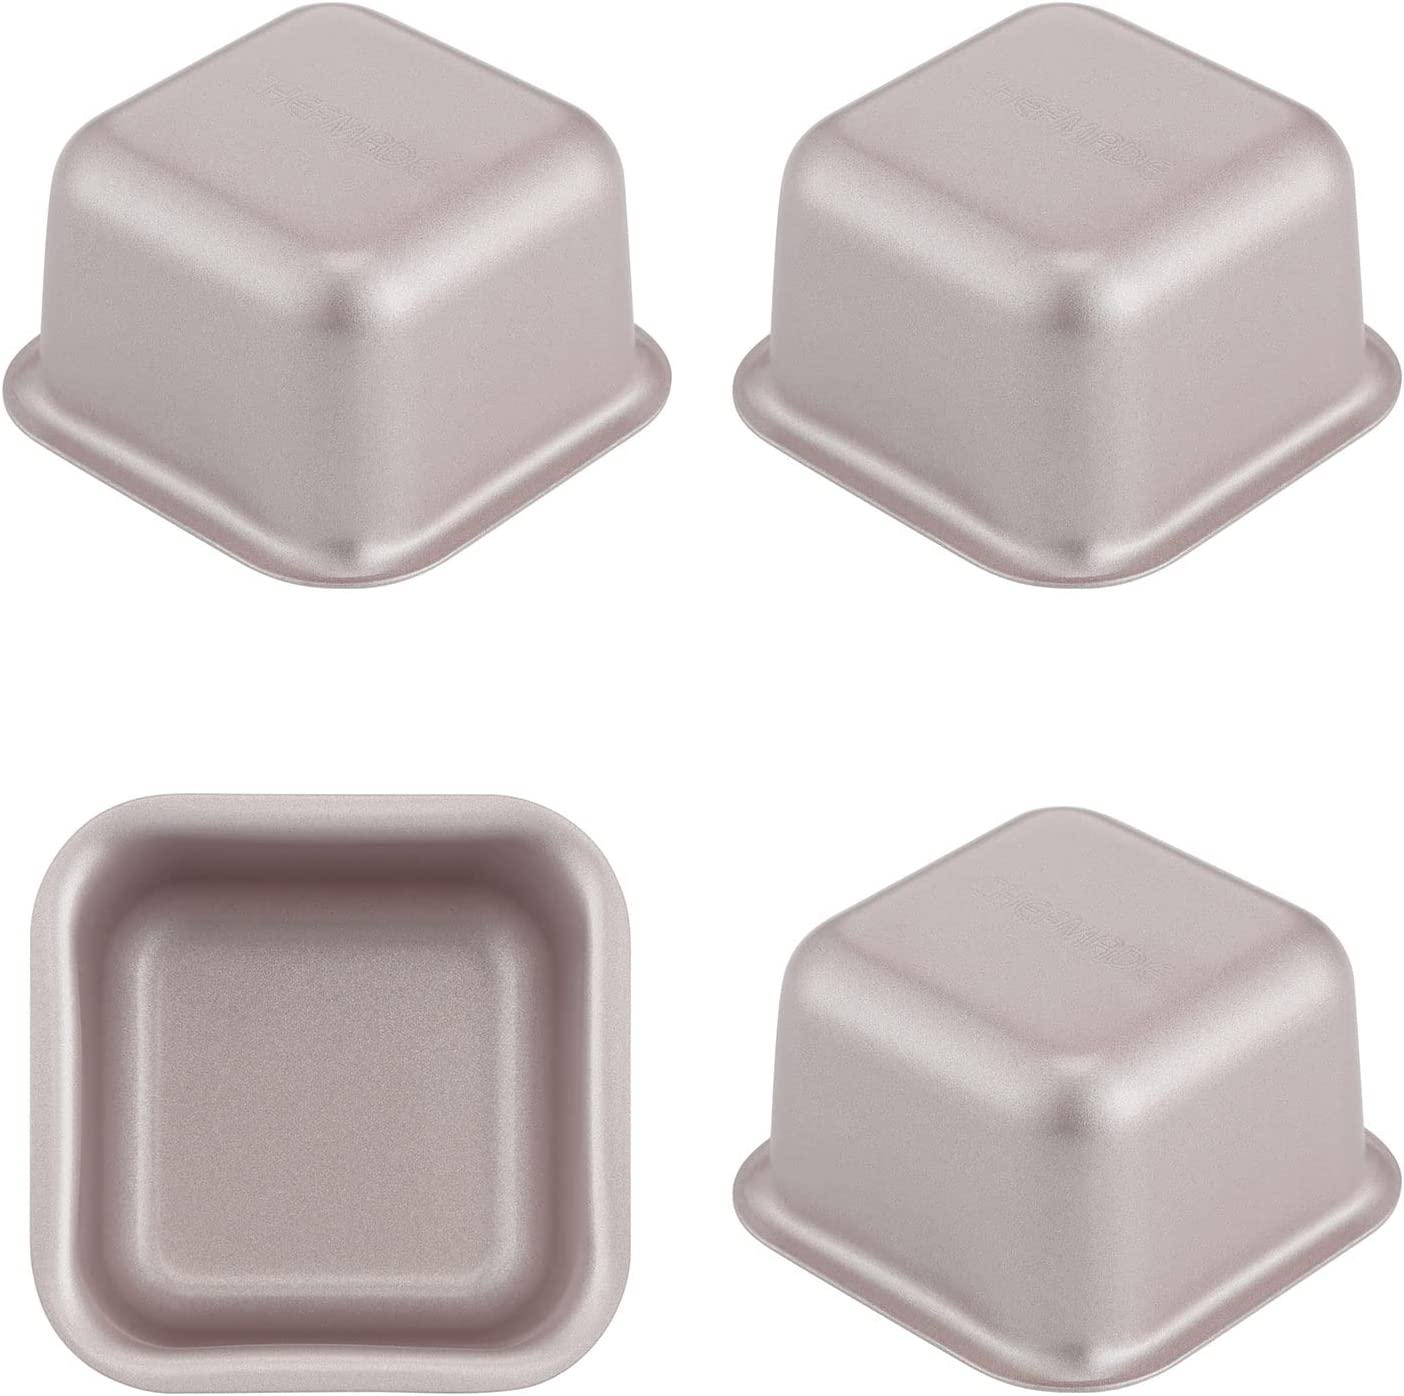 square cupcake pan factory, bulk square muffin tray, industrial